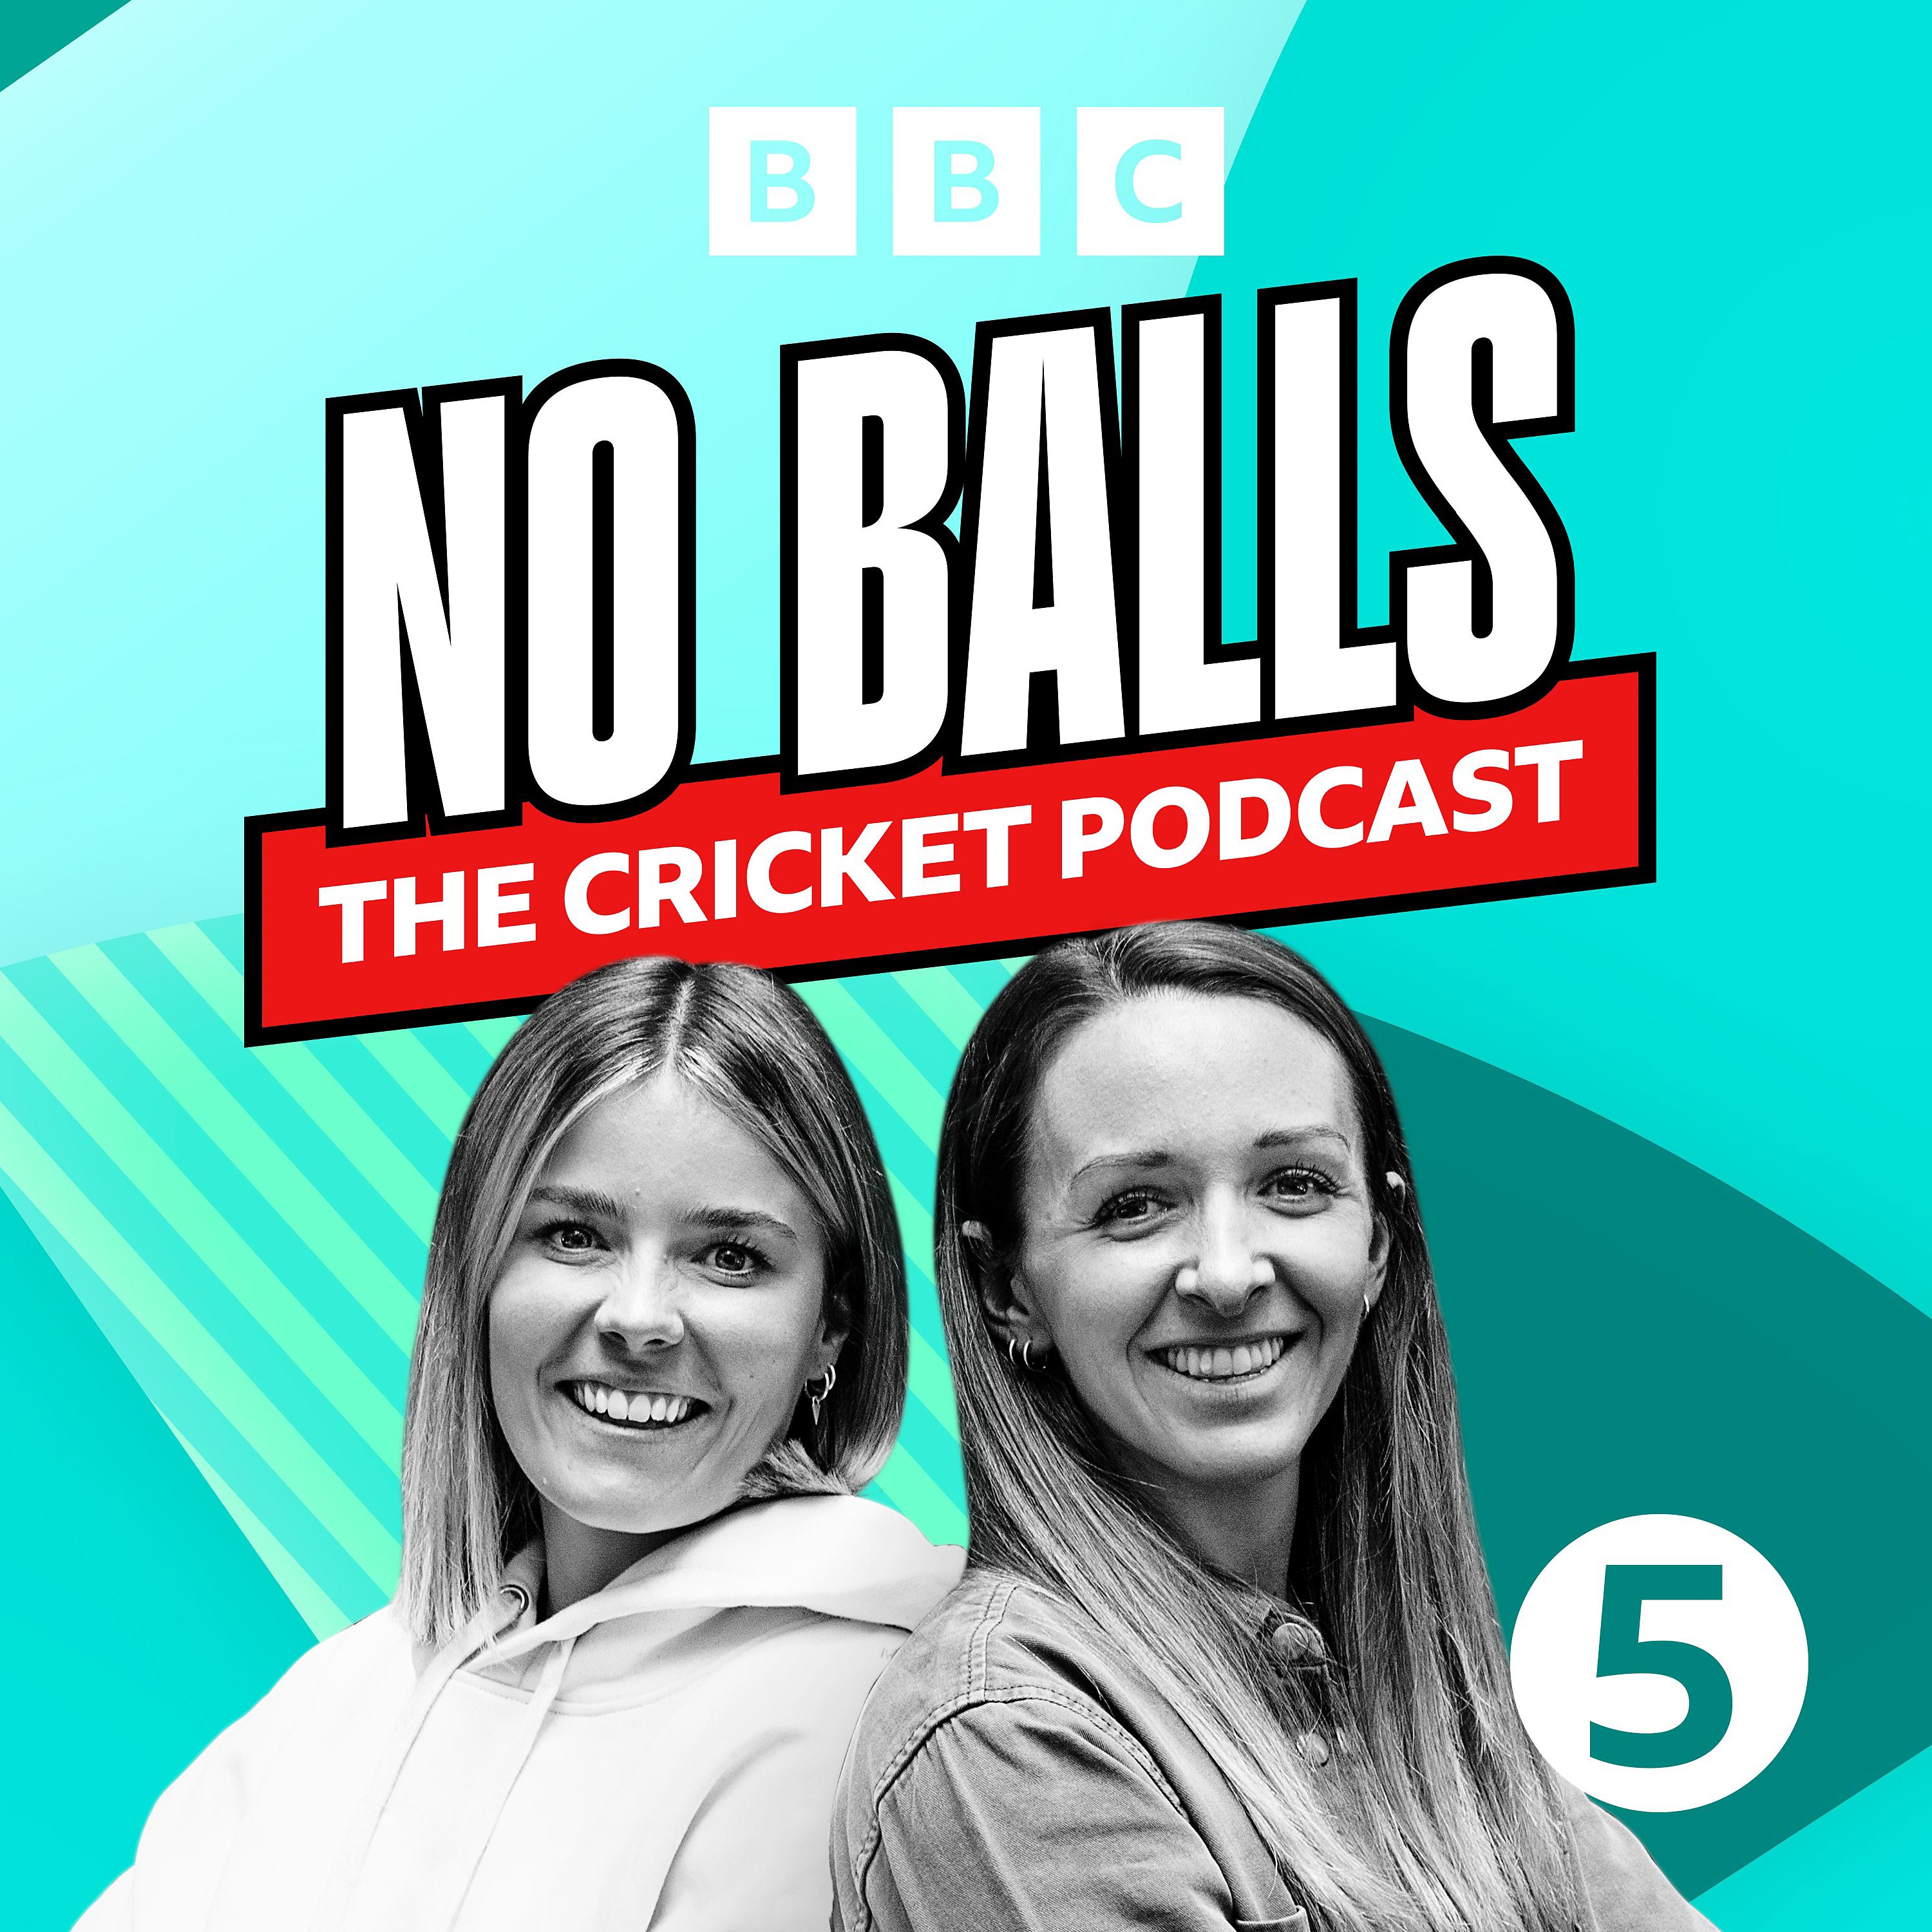 No Balls: The Cricket Podcast - The one where Crossy remembered to press record